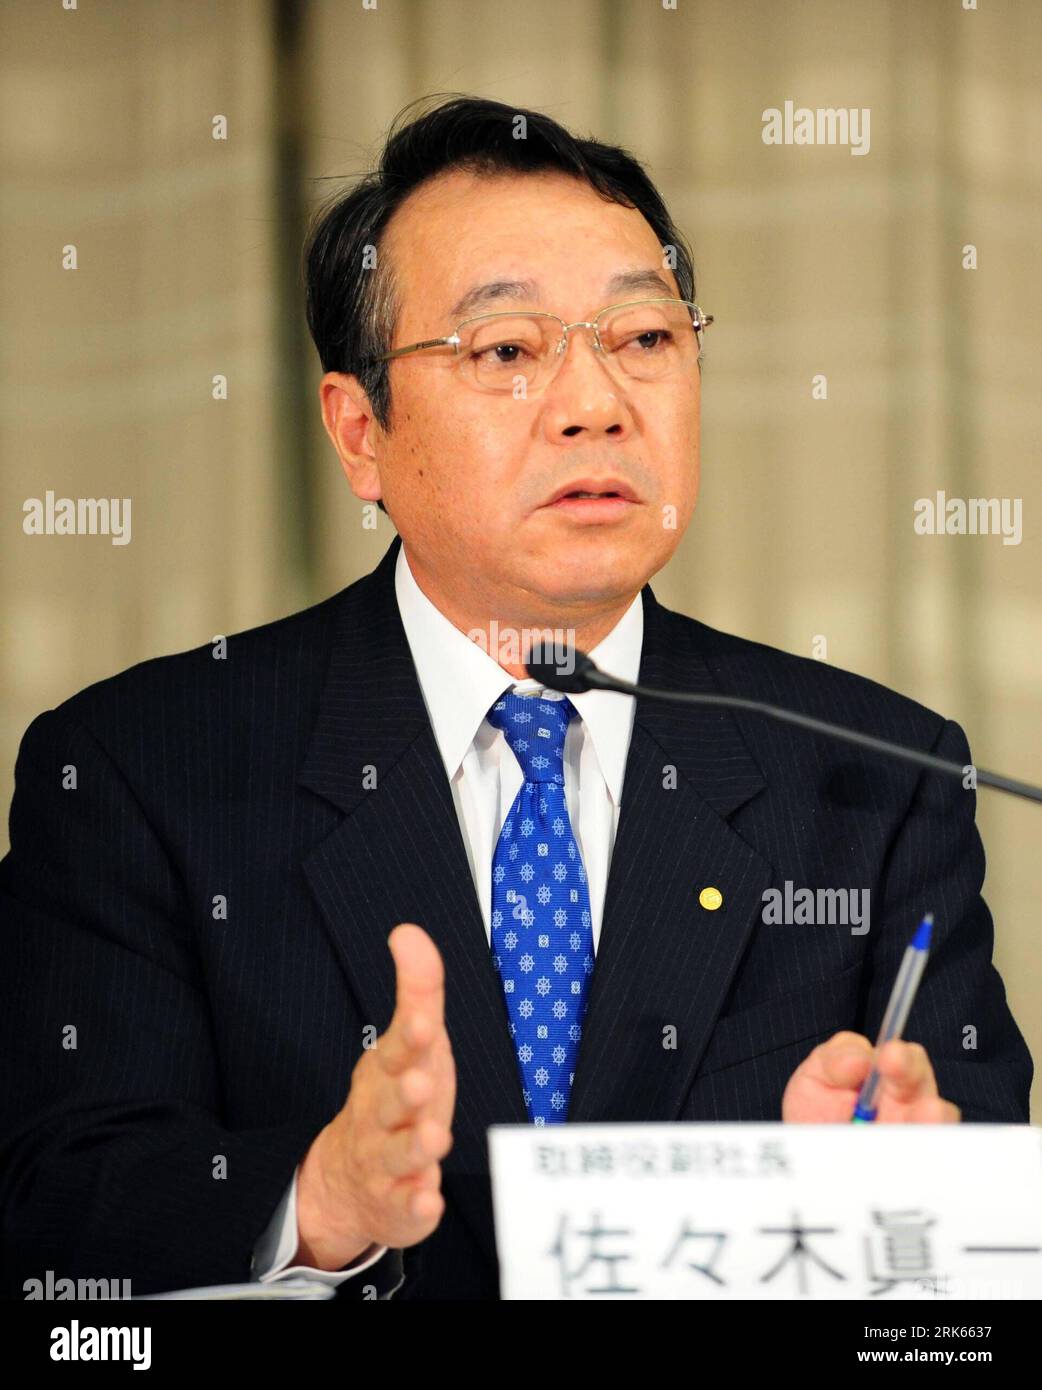 Bildnummer: 53802460  Datum: 17.02.2010  Copyright: imago/Xinhua (100217) -- TOKYO, Feb. 17, 2010 (Xinhua) -- Toyota Motor Corp. Vice President Shinichi Sasaki attends a news conference, in Tokyo, Japan, on Feb. 17, 2010. Toyota Motor Corp. President  said on Wednesday that he is unlikely to attend a U.S. congressional hearing later this month over the safety of Toyota products, and that North America chief  would attend in his place. (Xinhua/Ji Chunpeng) (axy) (1)JAPAN-TOKYO-TOYOTA-PRESS CONFERENCE PUBLICATIONxNOTxINxCHN People Wirtschaft kbdig xdp 2010 hoch premiumd    Bildnummer 53802460 Da Stock Photo